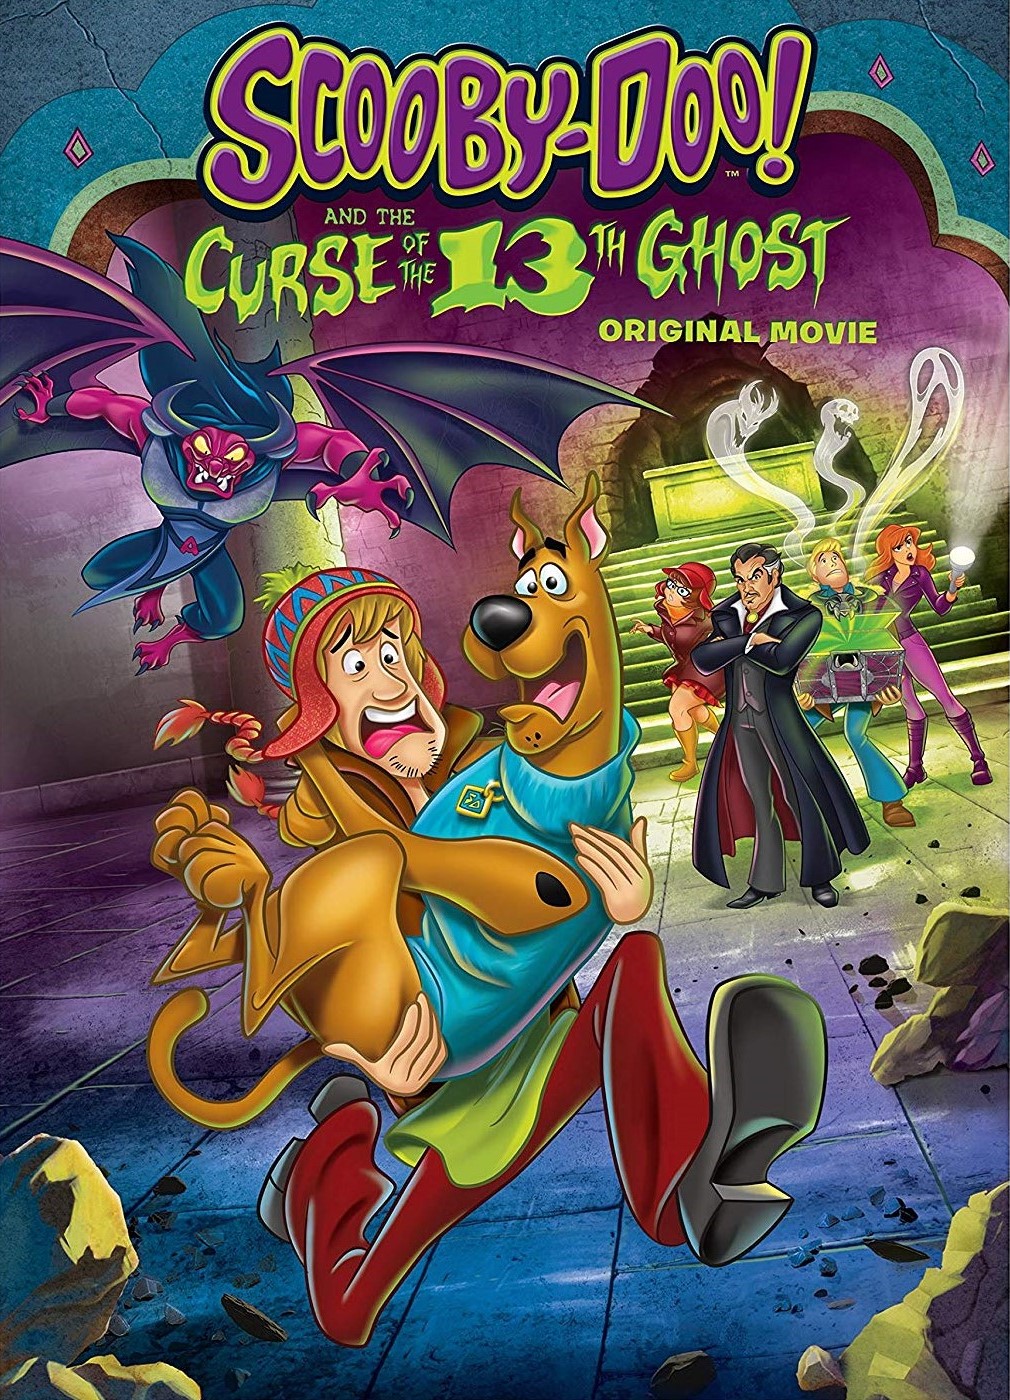  Scooby  Doo  and the Curse of the 13th Ghost DVD  